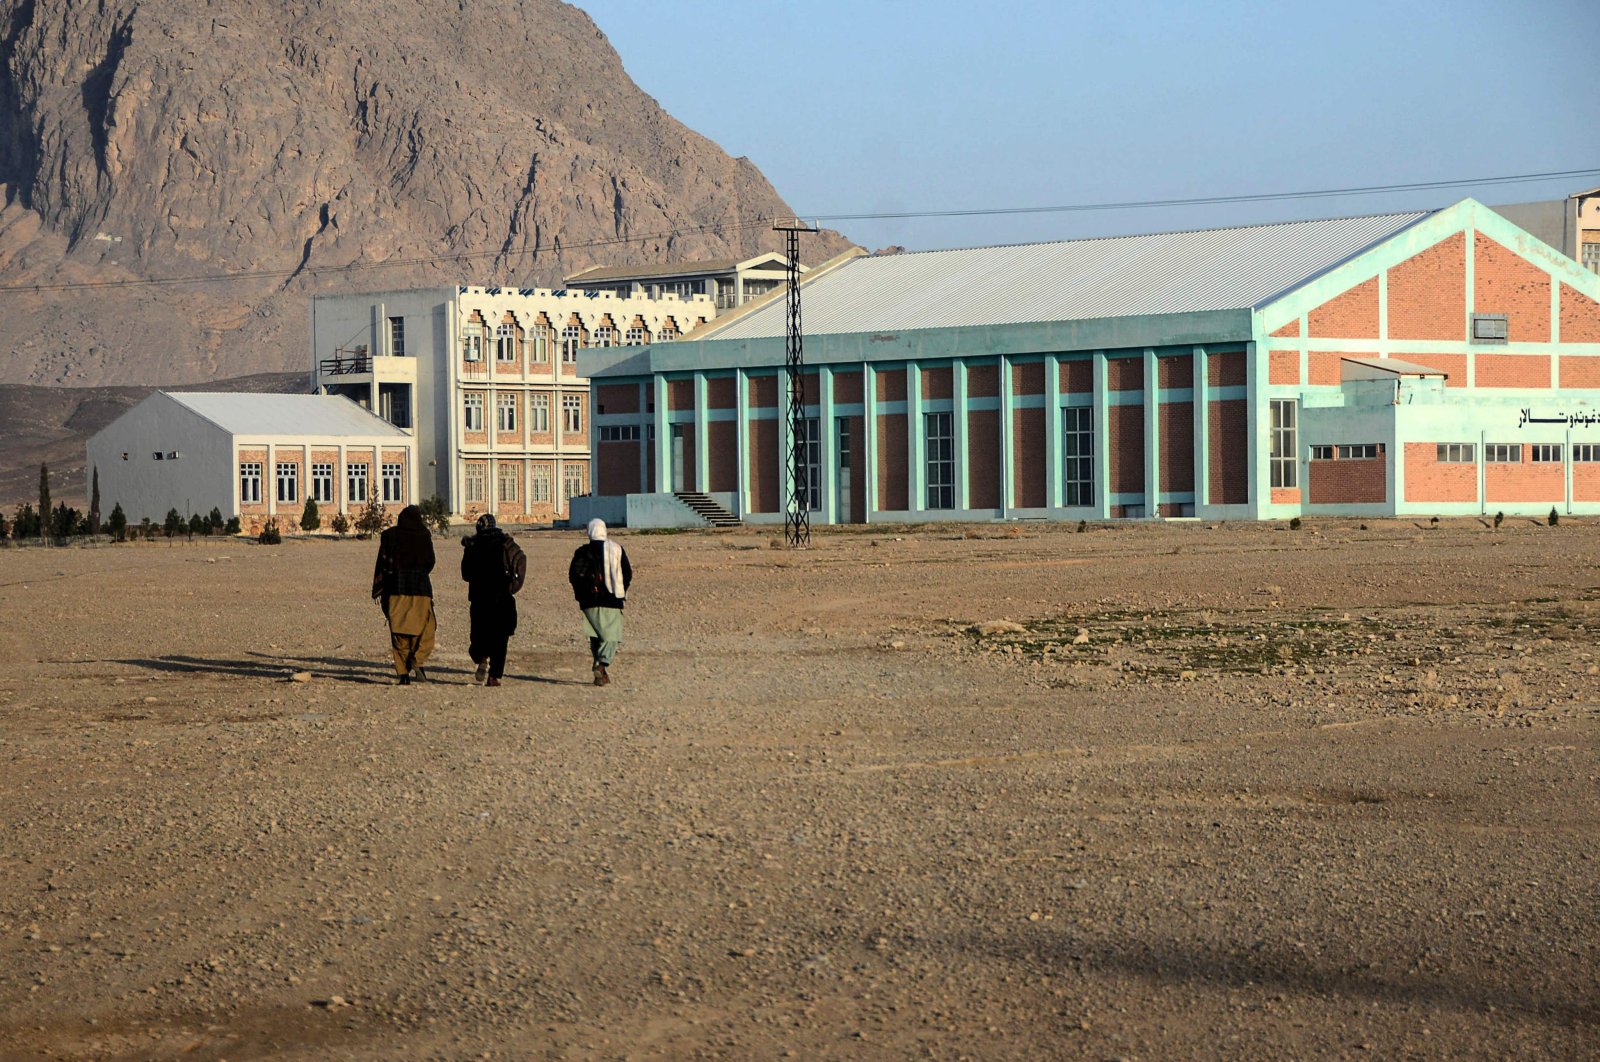 Students walk in the courtyard of Kandahar University as the Taliban reopened public universities across some provinces, in Kandahar, Afghanistan, Feb. 2, 2022. (AFP Photo)